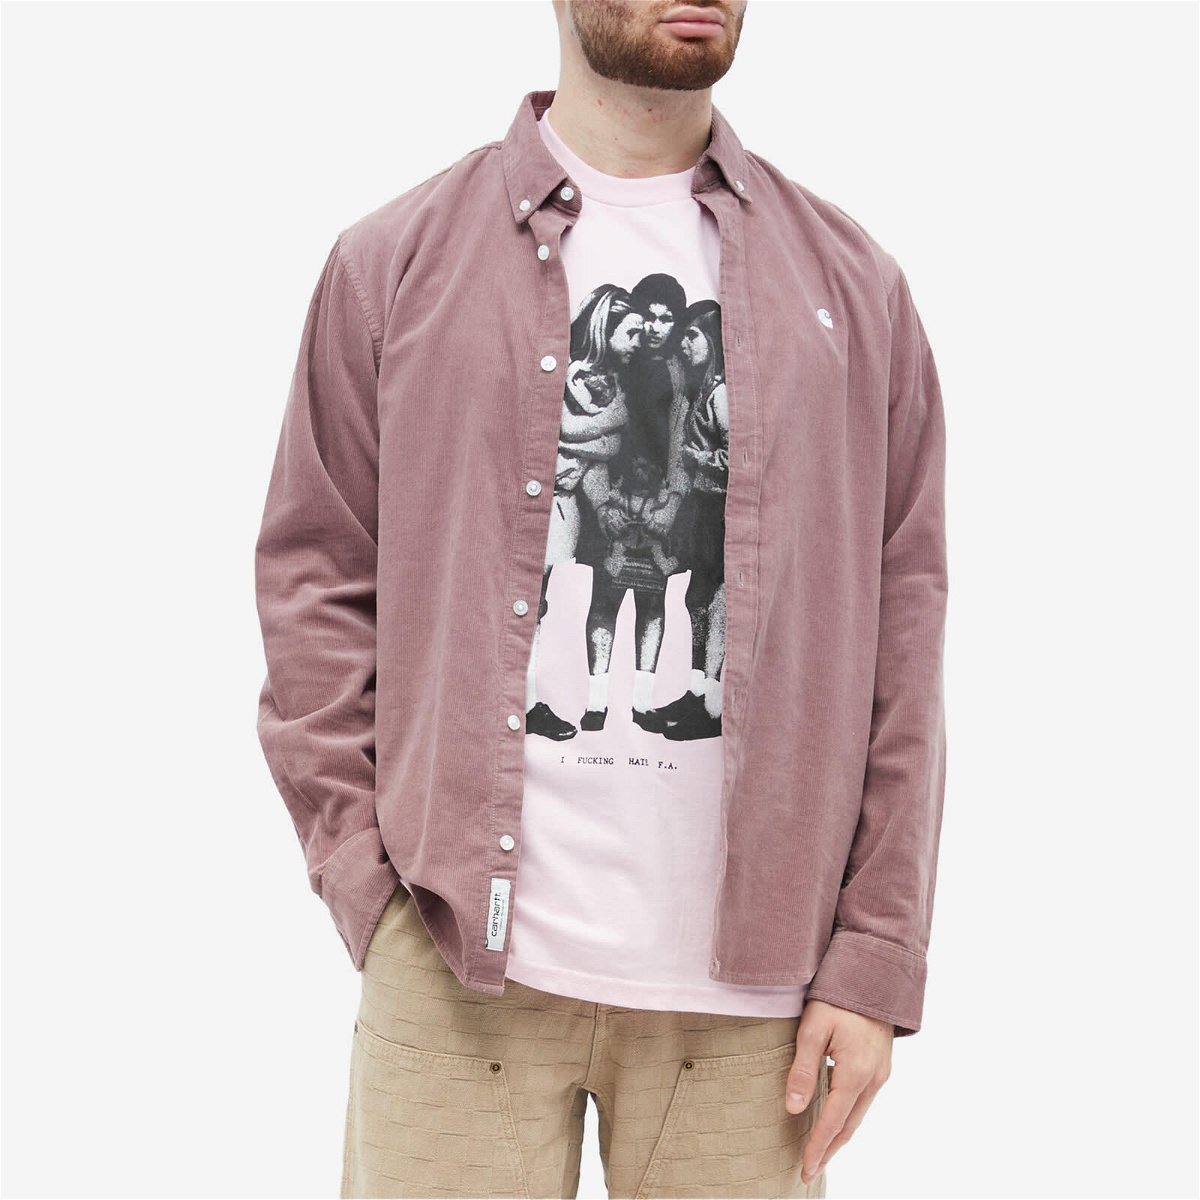 Fucking Awesome Men's Hate FA T-Shirt in Light Pink Fucking